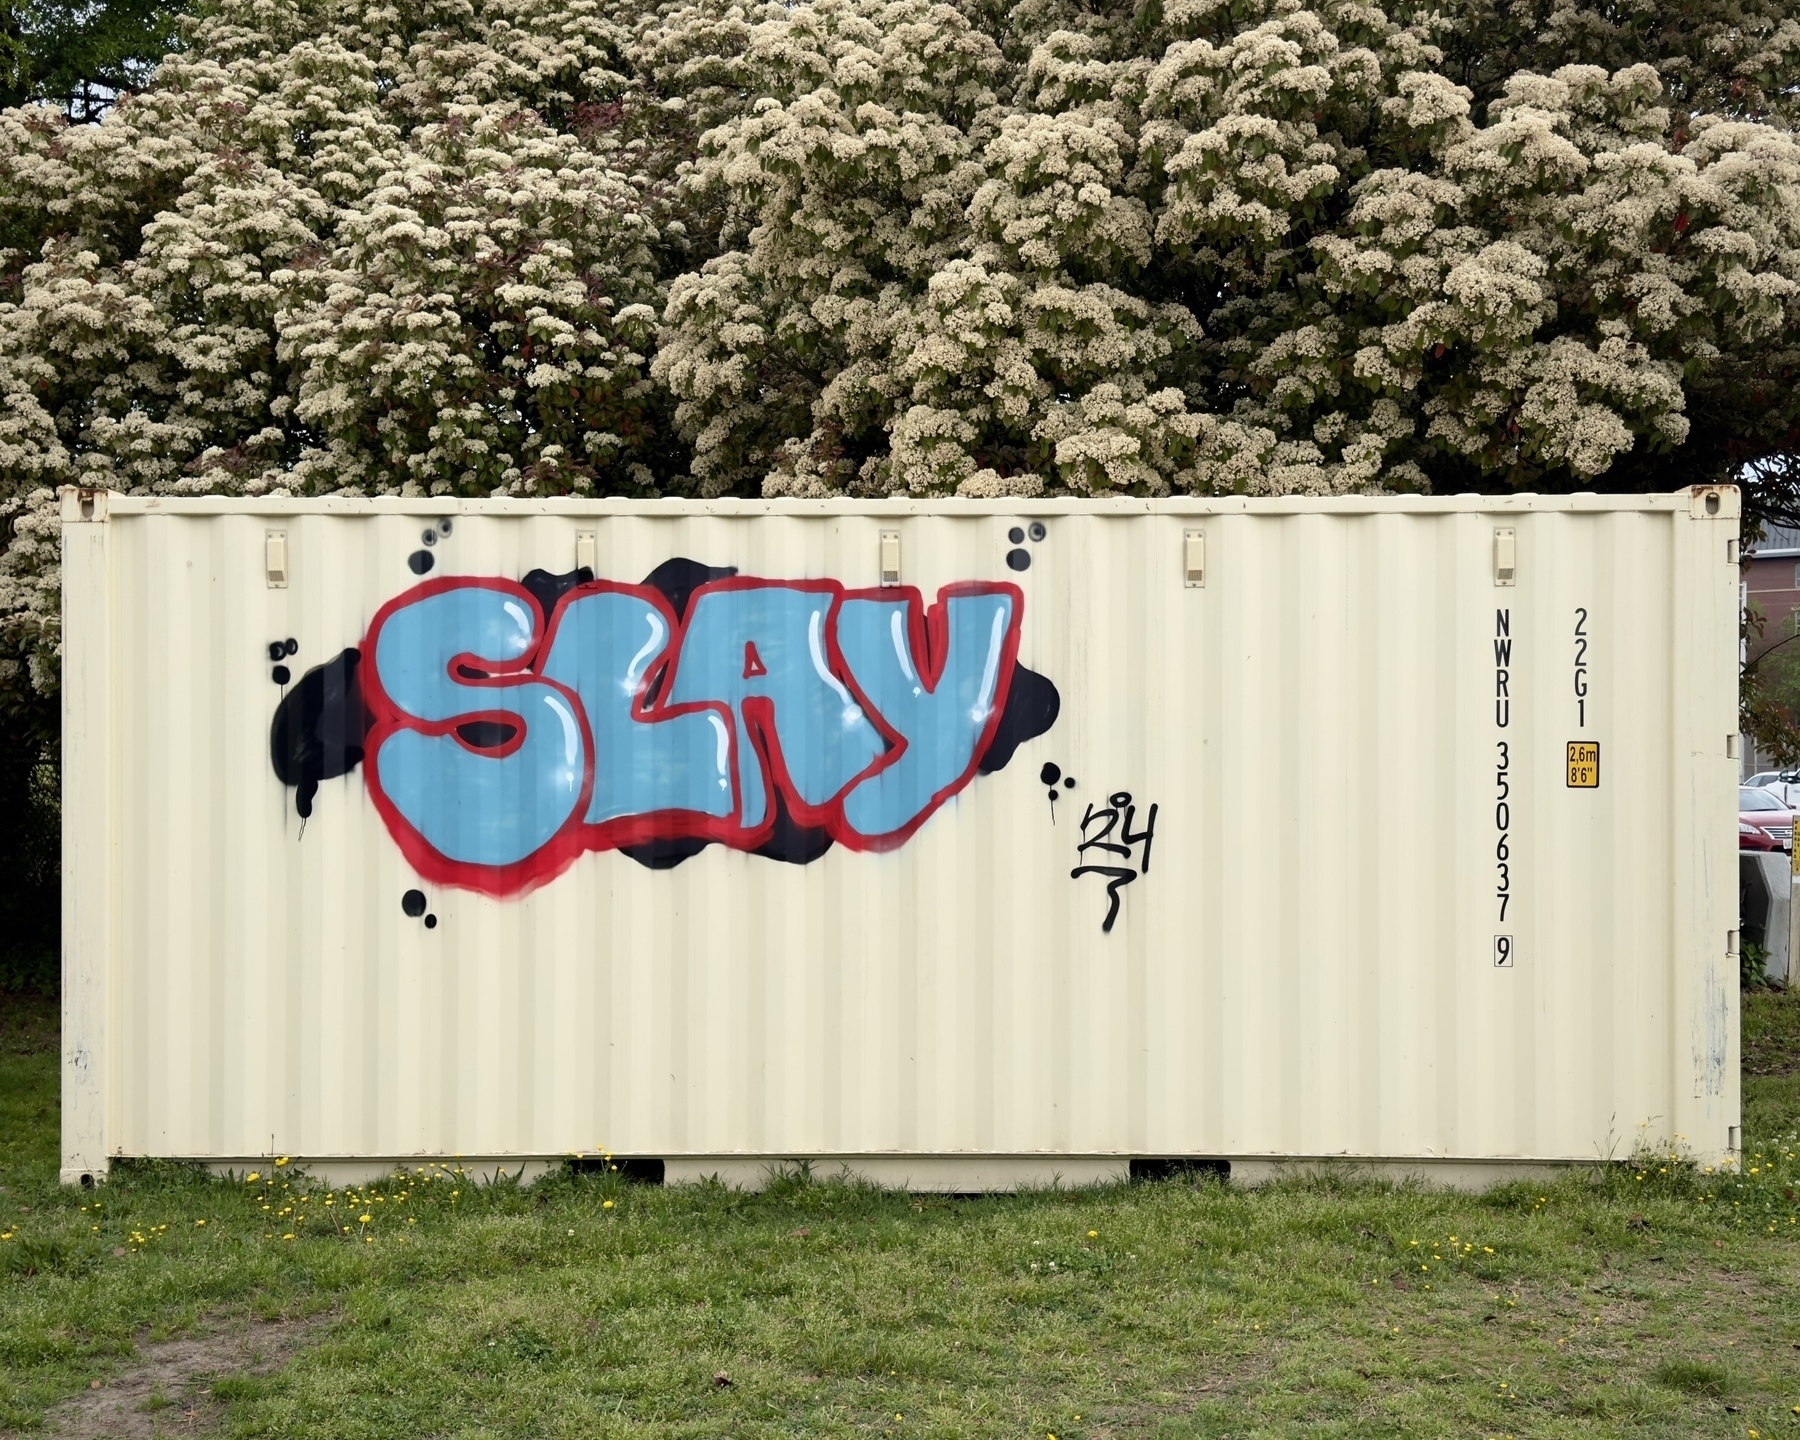 A shipping container with the word “slay” graffiti’d on the side